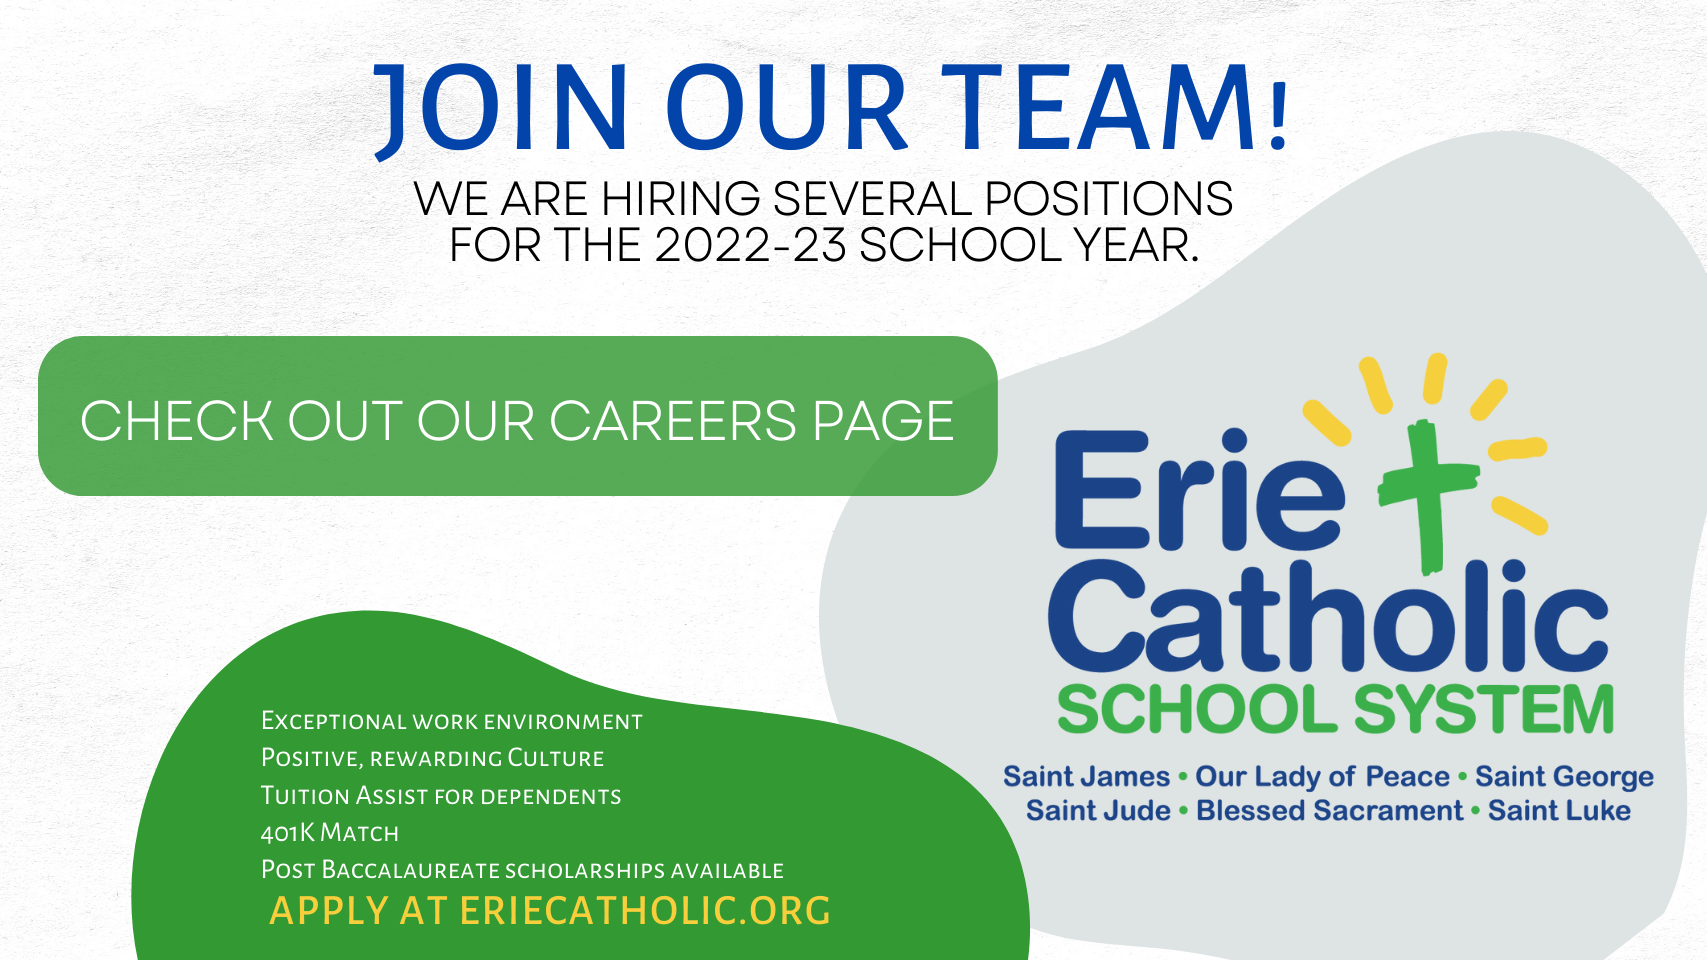 An advertisement for the erie catholic school system